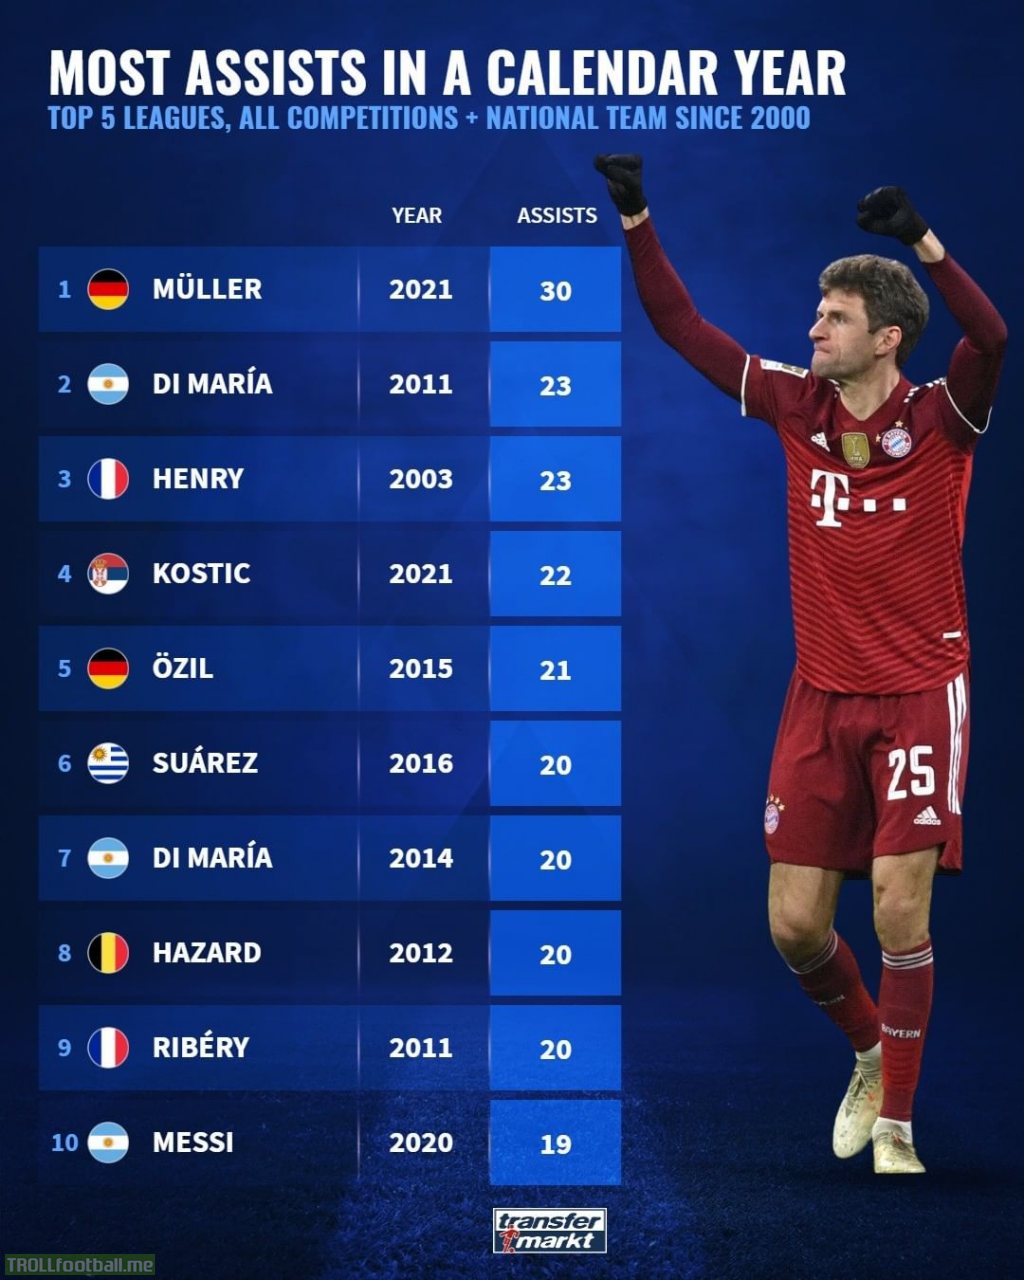 [Transfermarkt] Most assists in a calendar year. Top 5 leagues, all